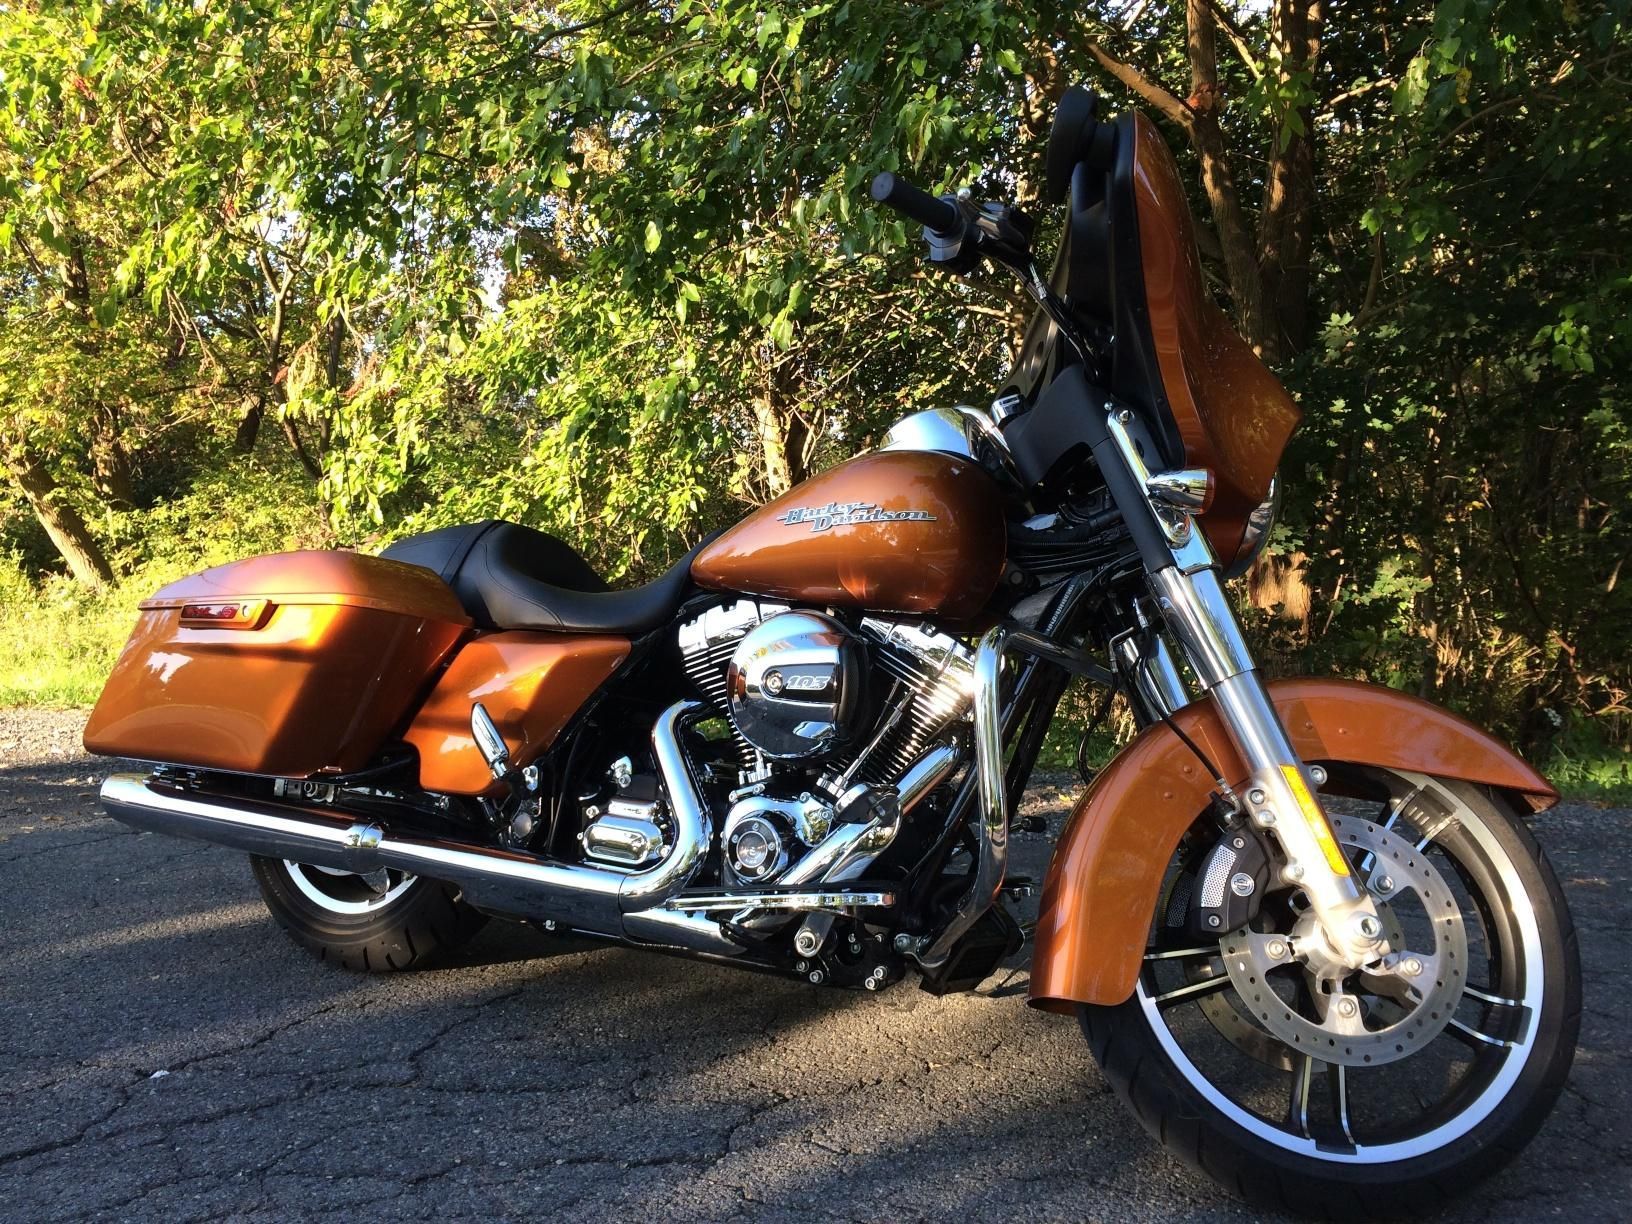 FLHX 2014 Street Glide - Reviewed in New York State